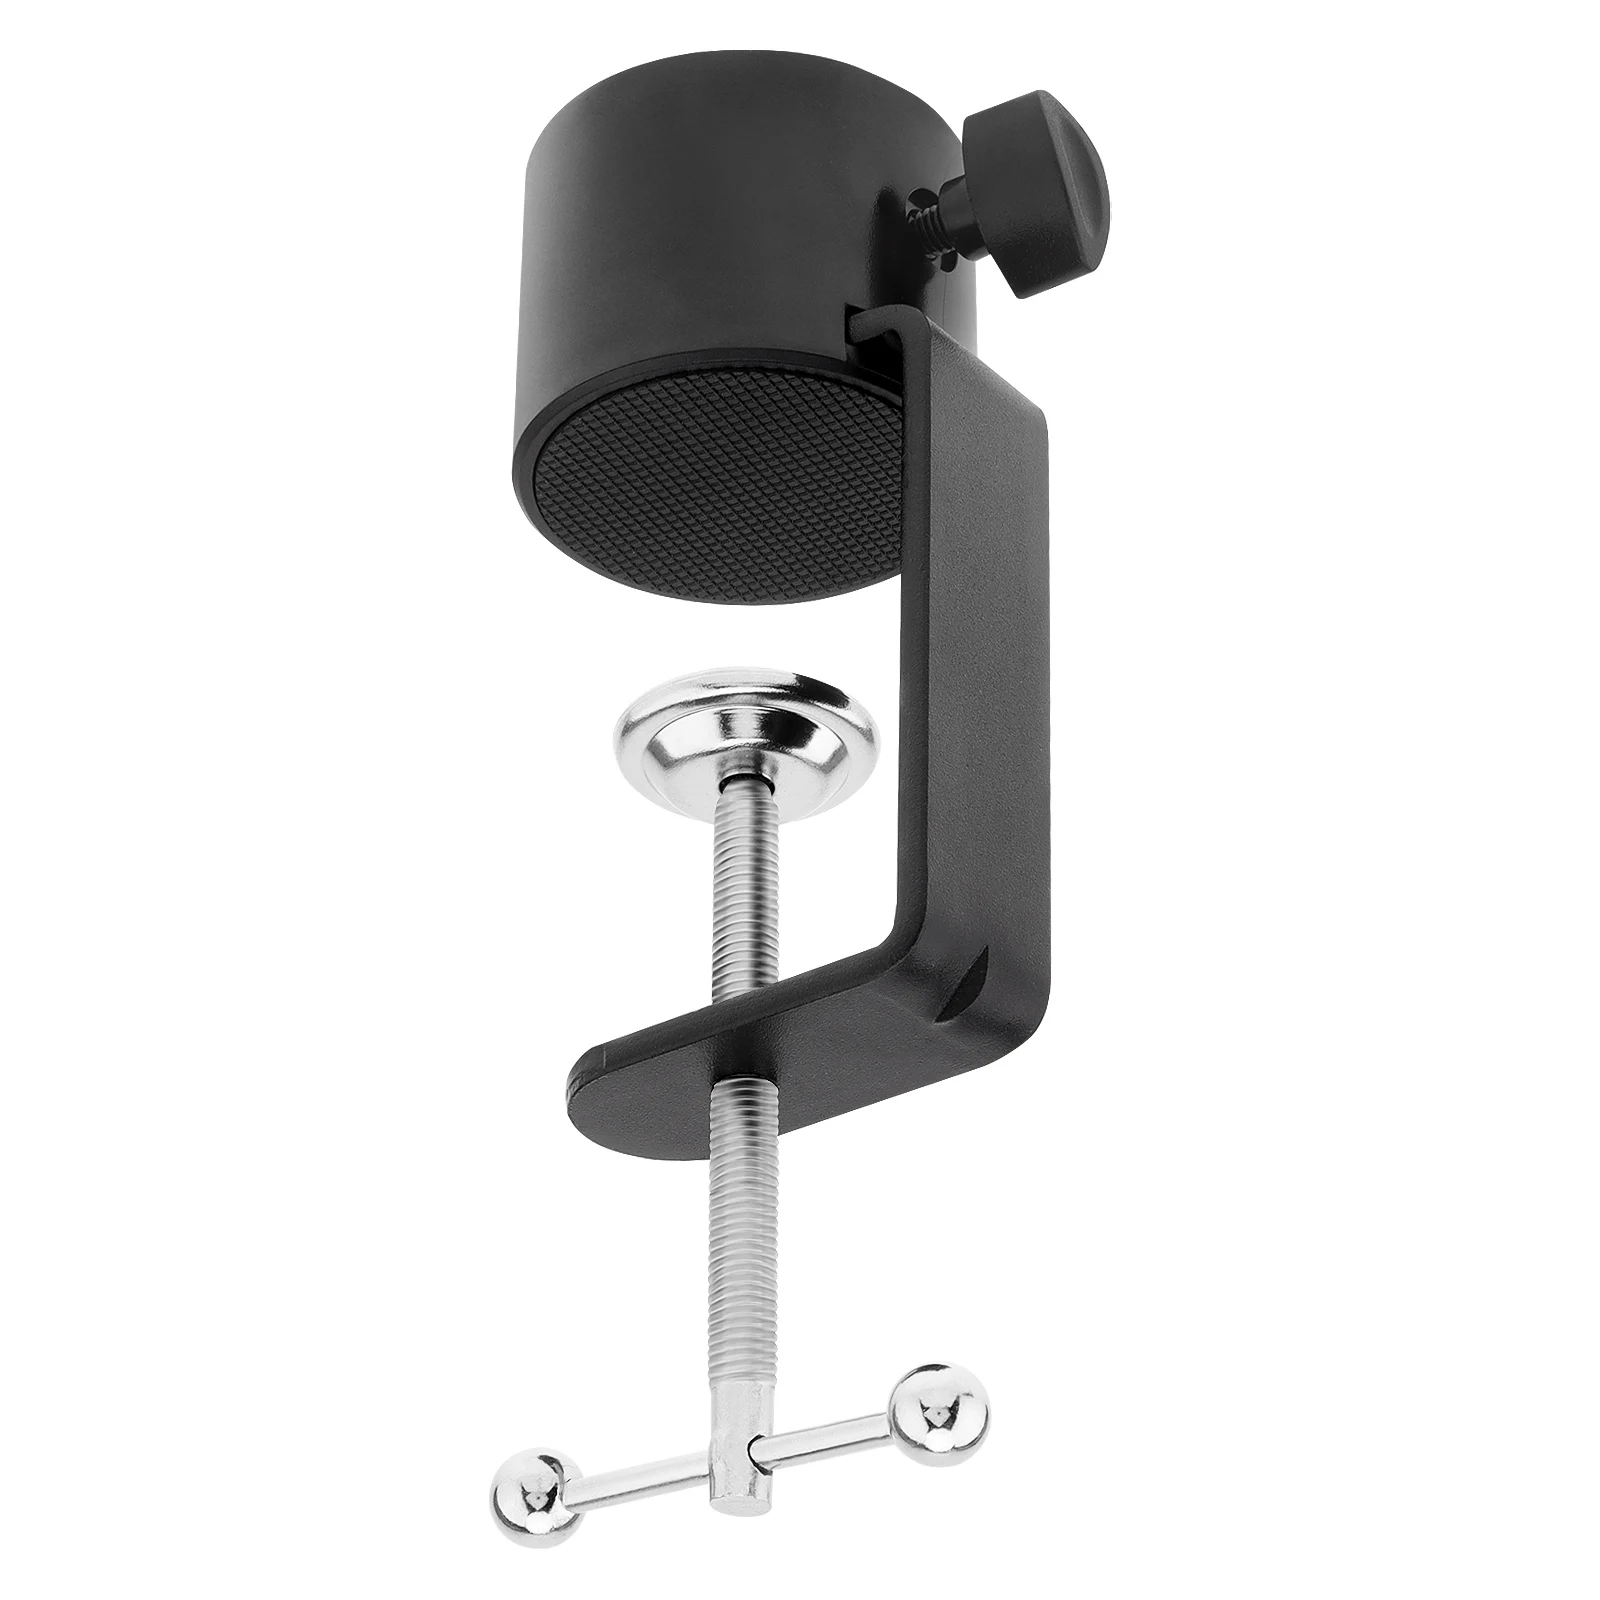 Desk Clamp Table Mount Clamp Mic Clamp Holder for Microphone Arm Stand Holder Desk Lamp Bracket Clamp